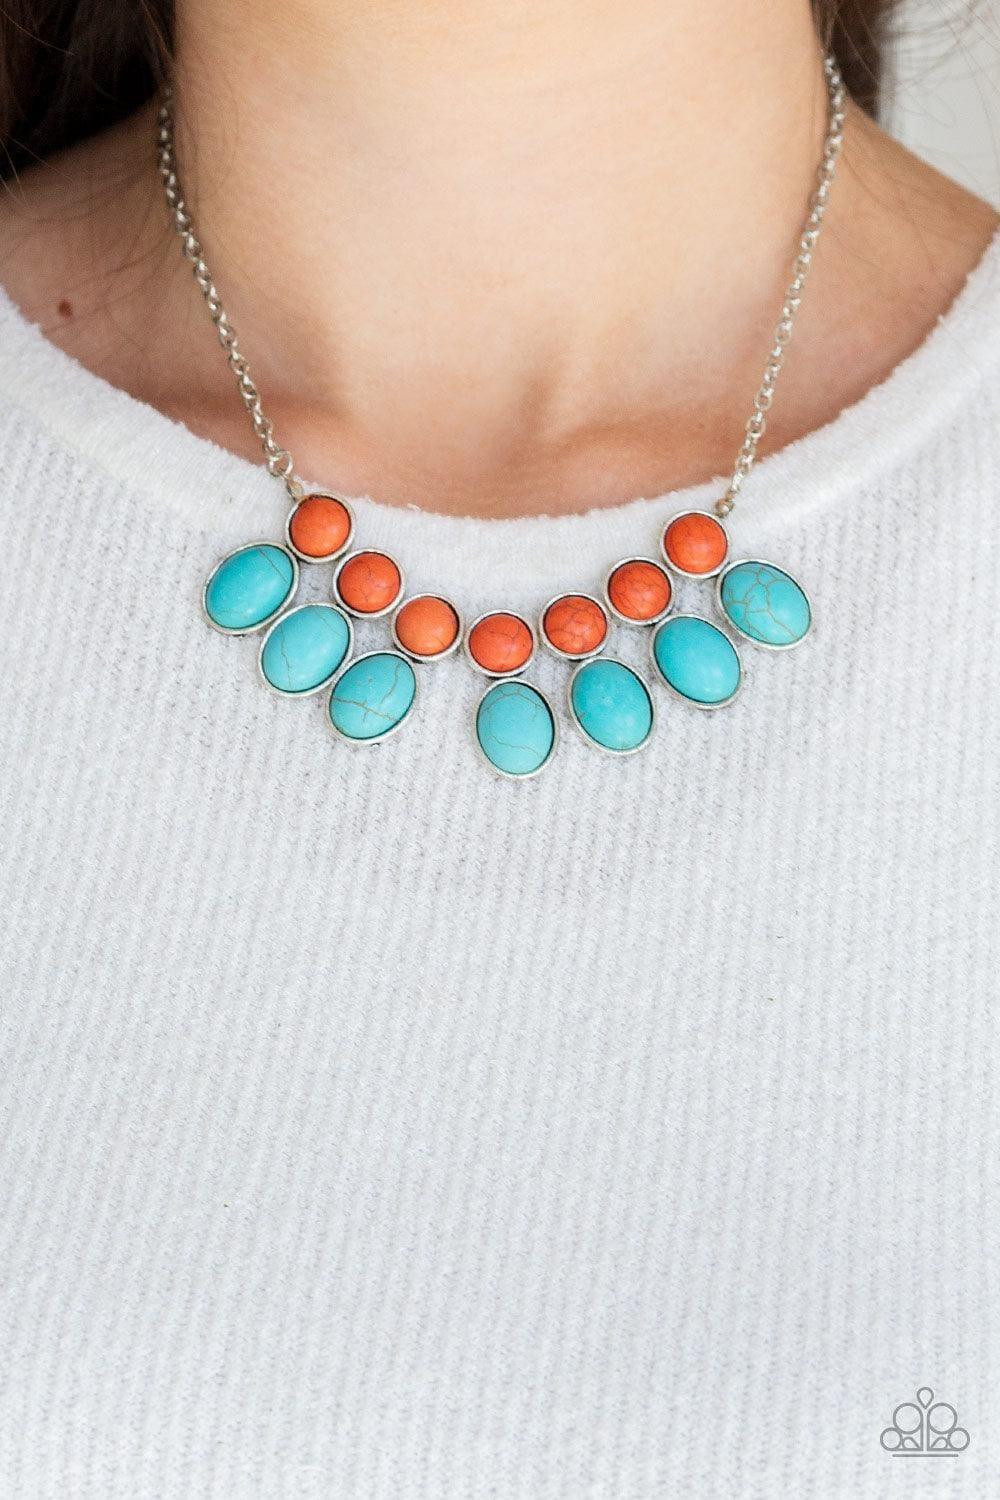 Paparazzi Accessories - Environmental Impact - Blue Turquoise Necklace - Bling by JessieK